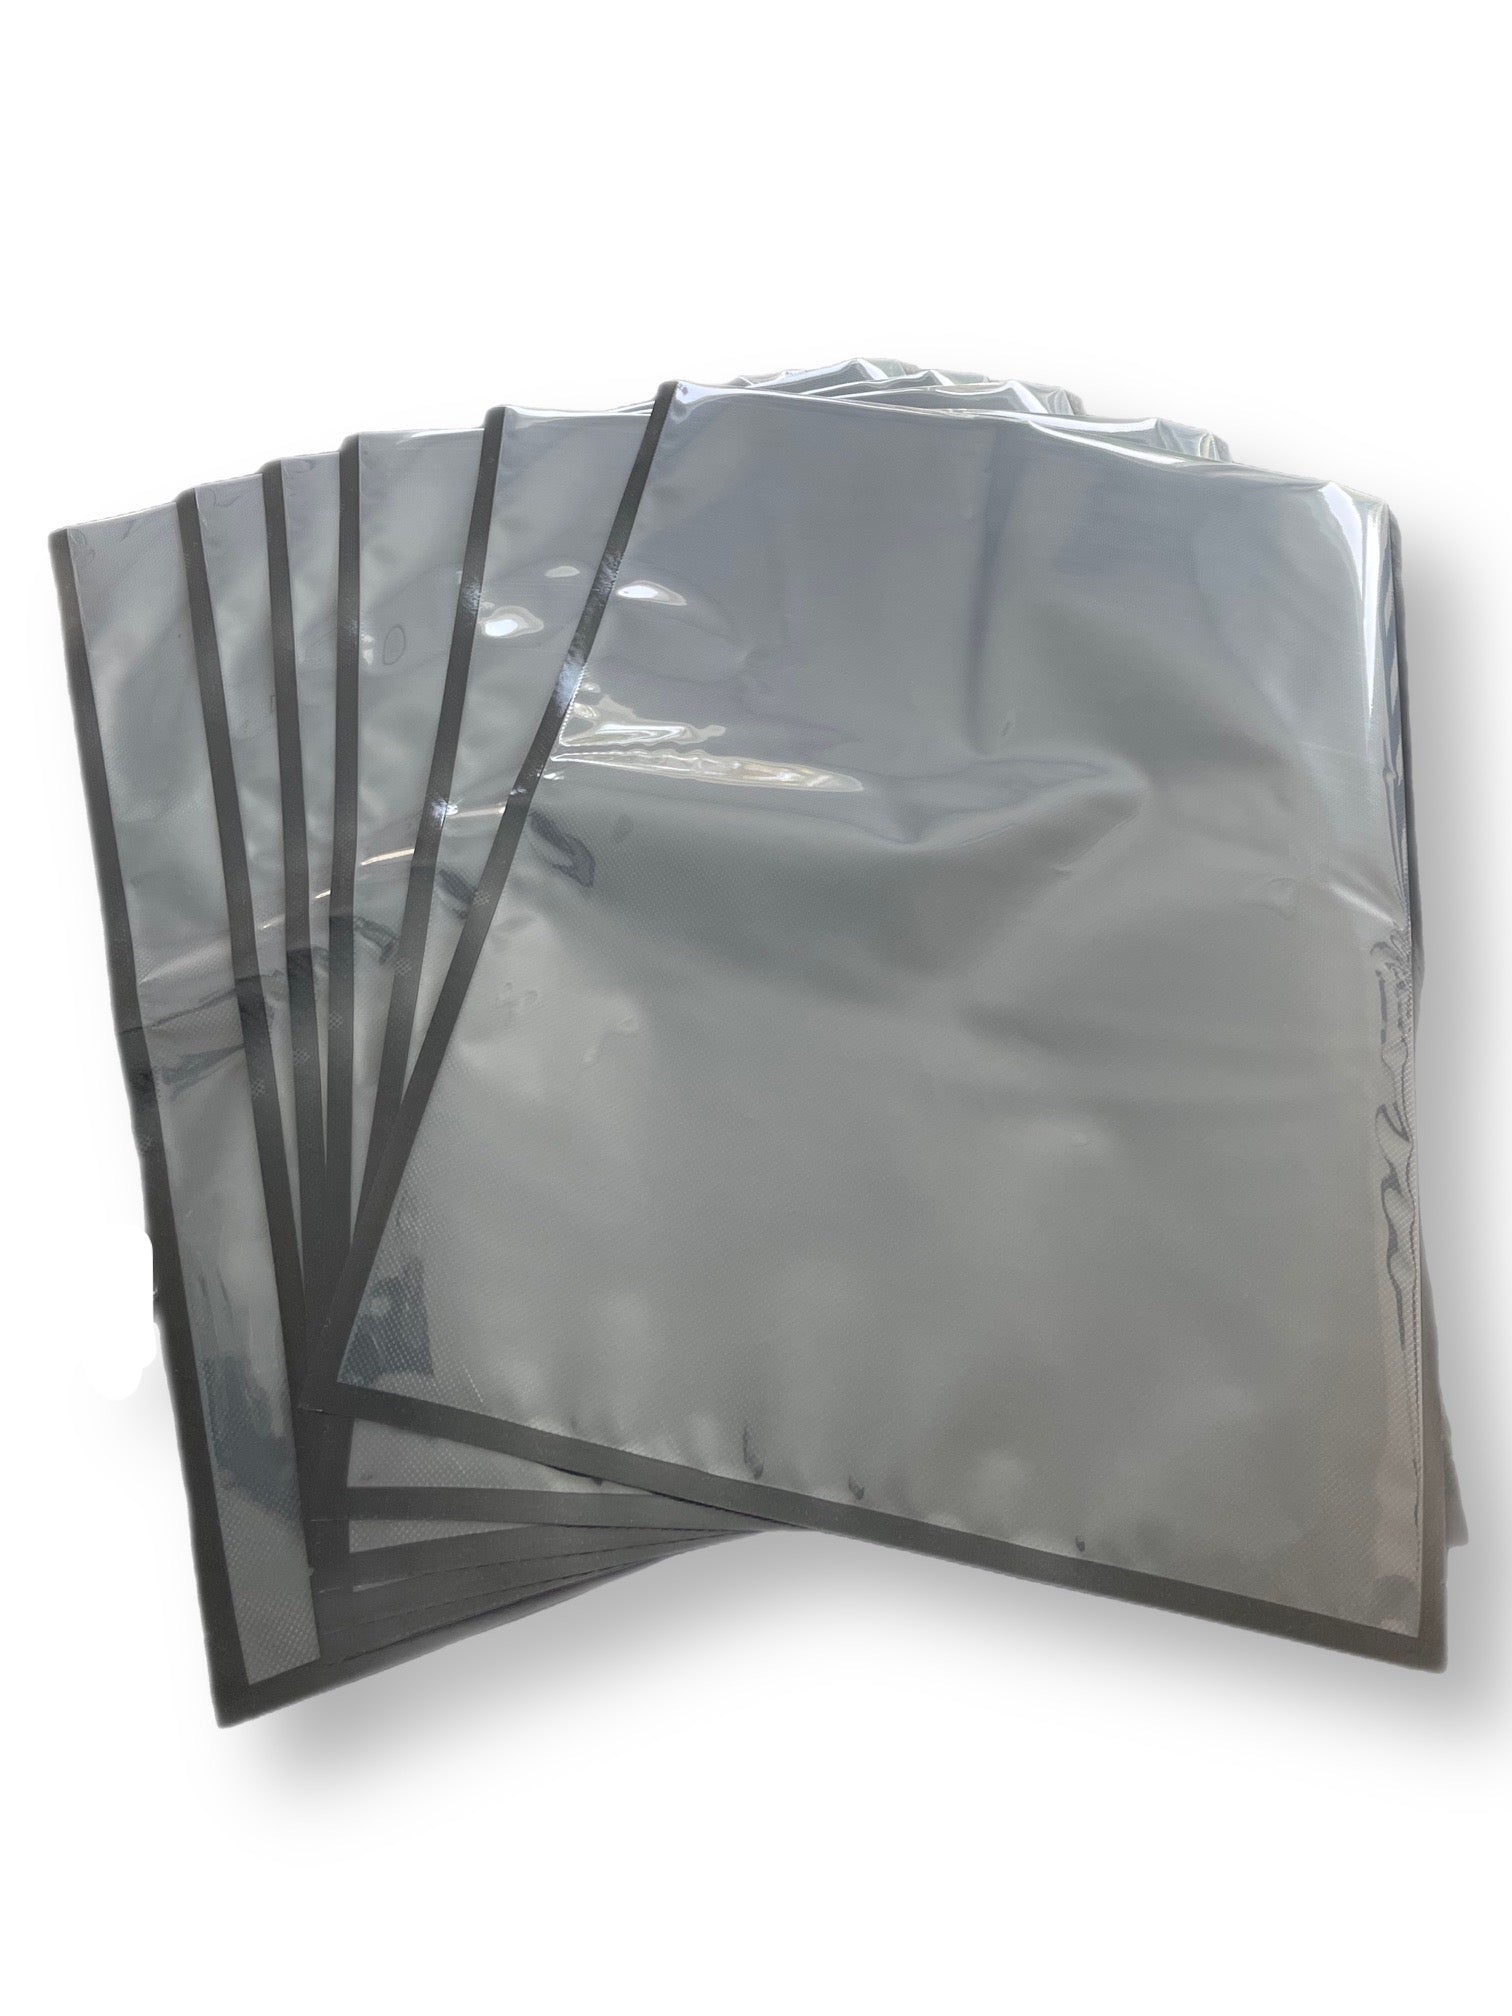 Stacked 454 Vacuum Bags sized at 11"x24", highlighting their precision cut and dual-tone design with one side black and the other clear